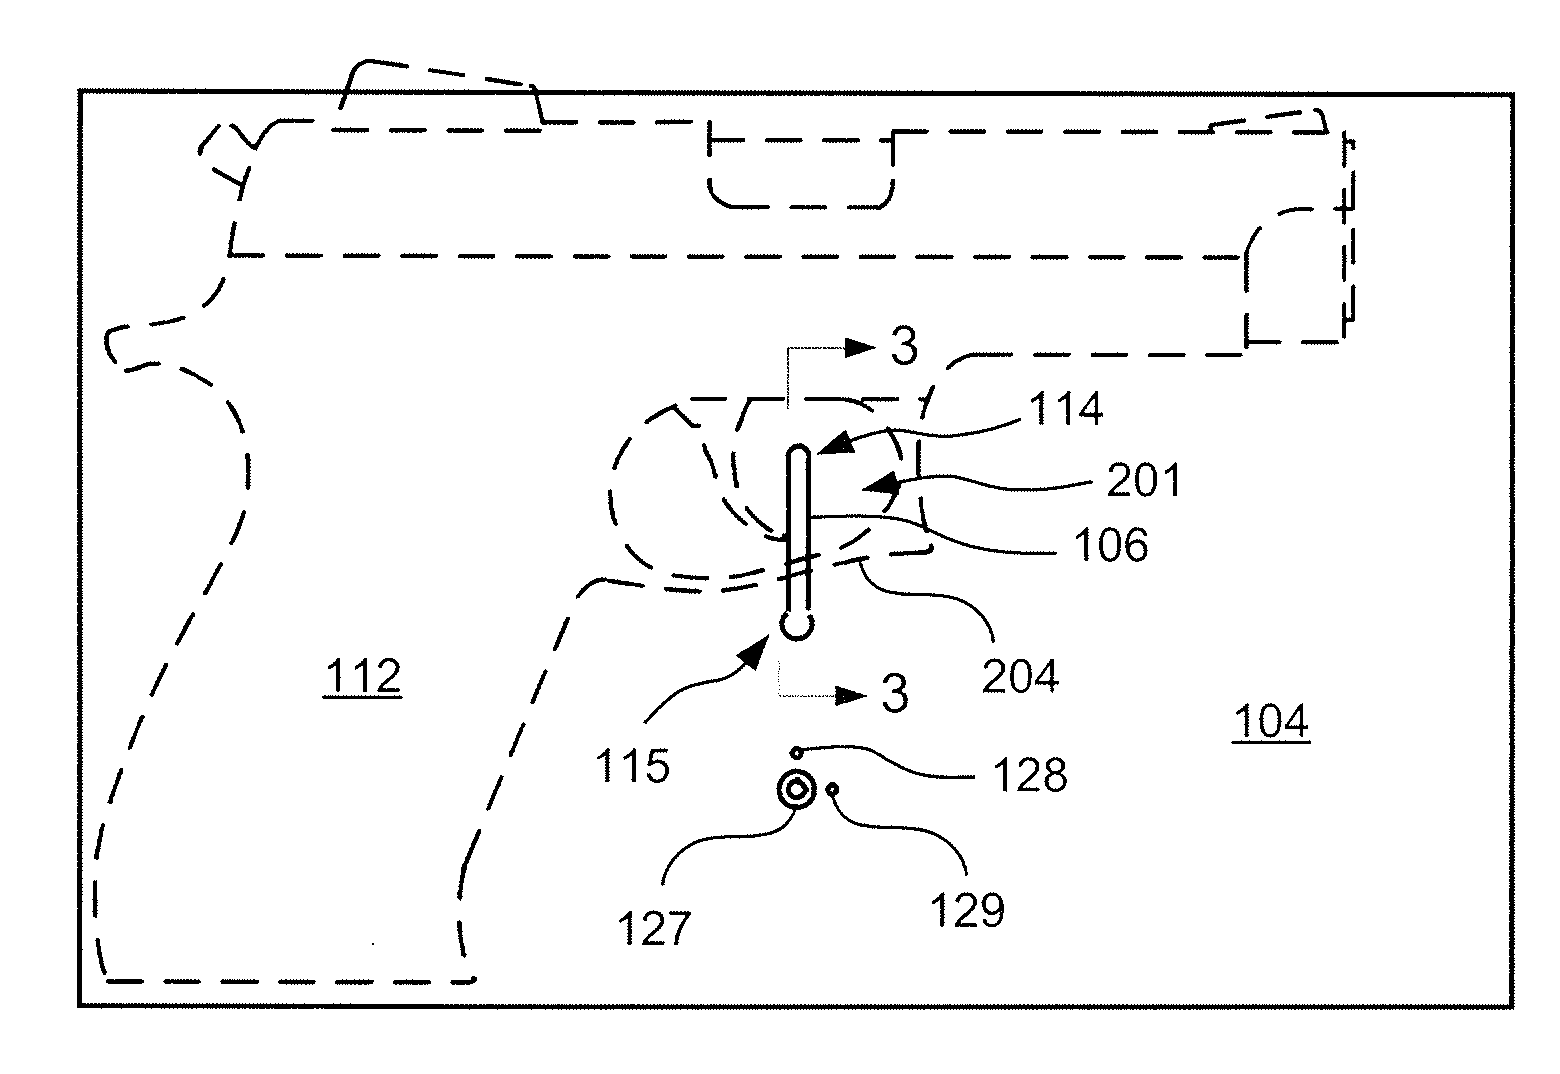 Interface between an object such as a firearm and an alarm or monitoring system